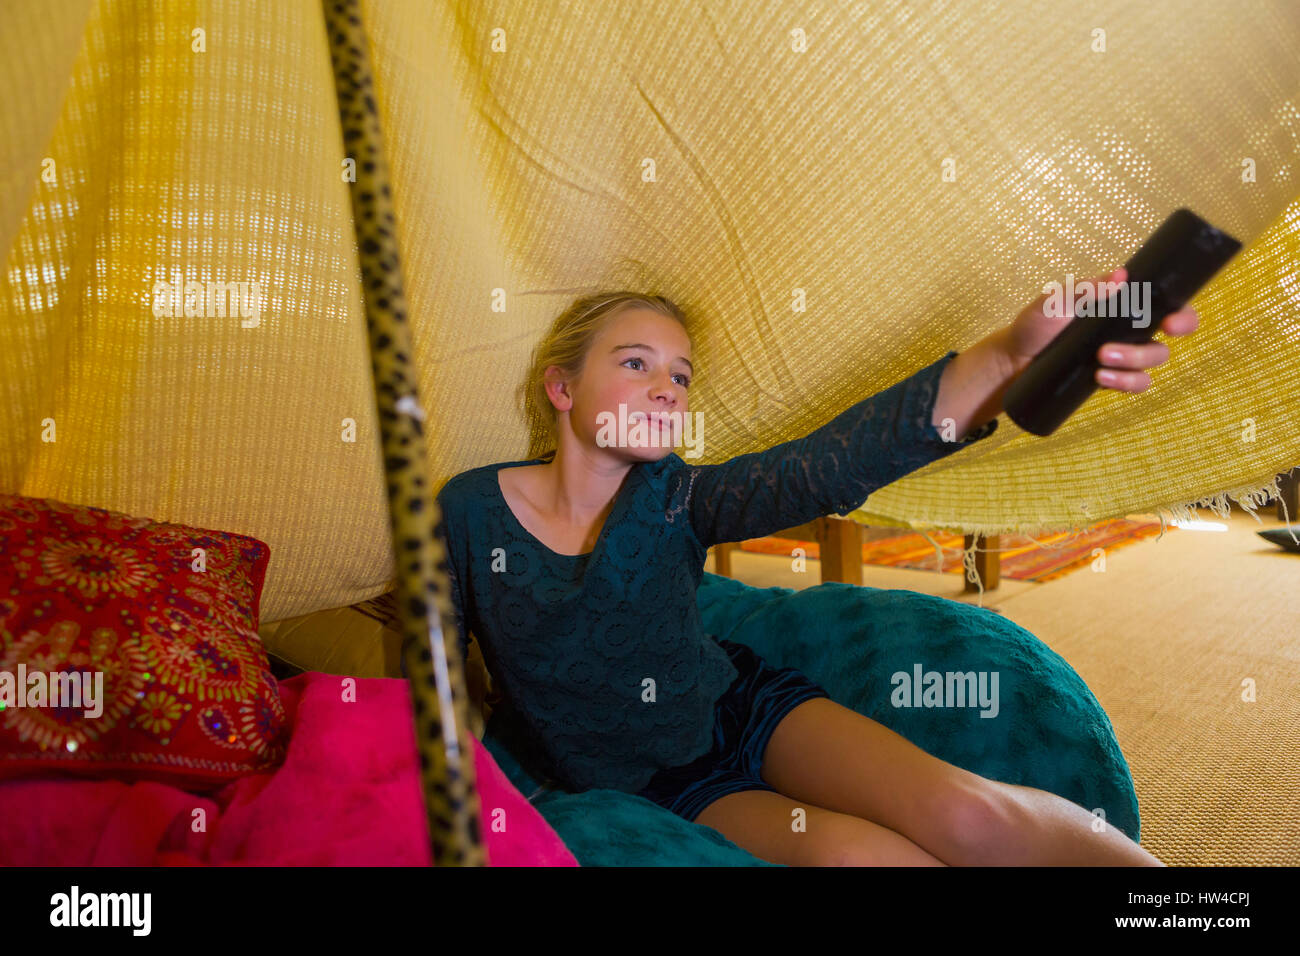 Caucasian girl using remote control in blanket fort Stock Photo